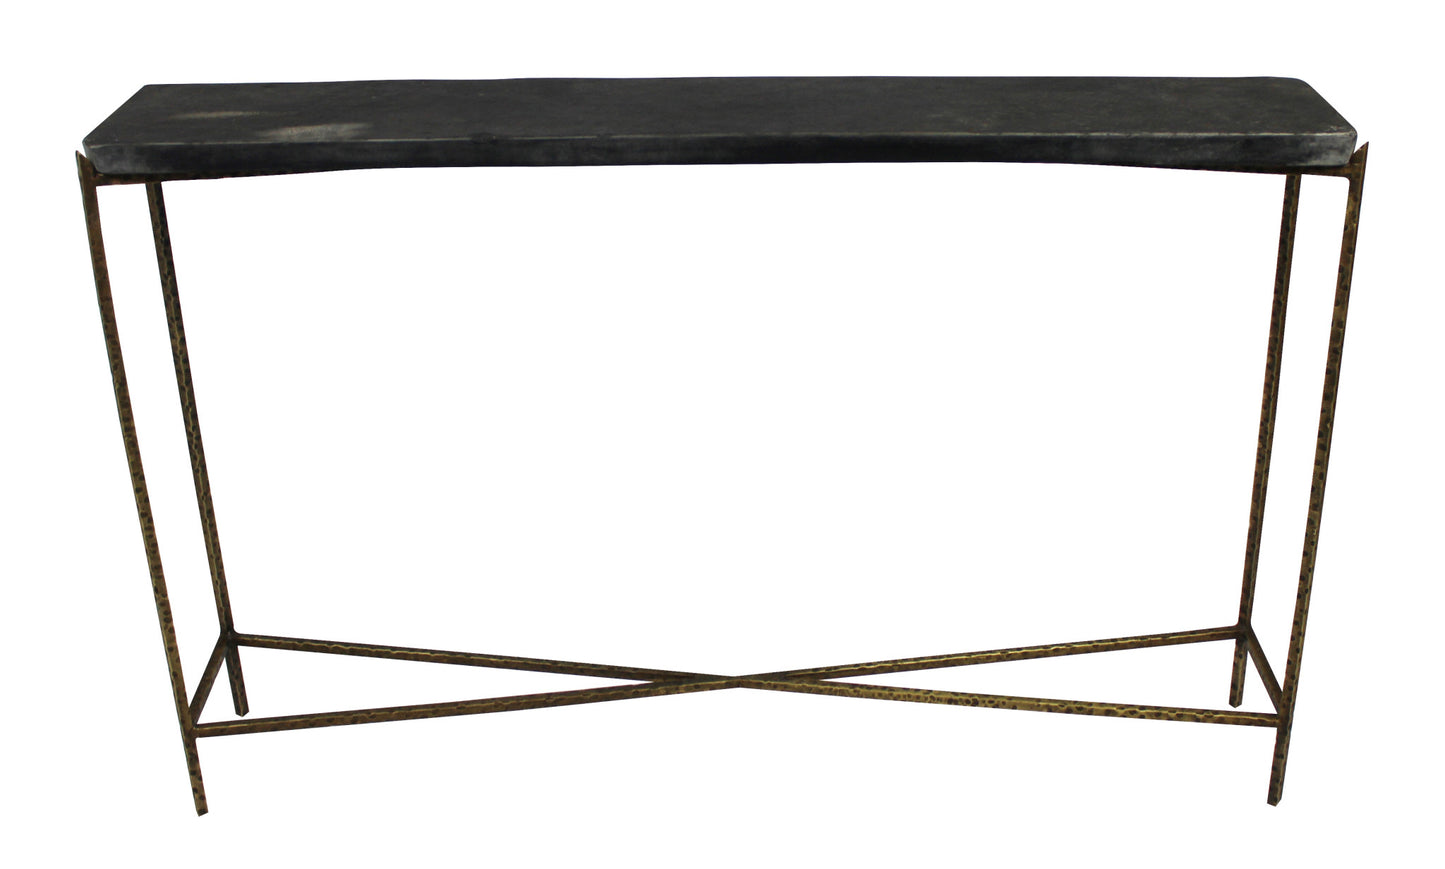 48" Black and Gold Stone Frame Console Table By Homeroots